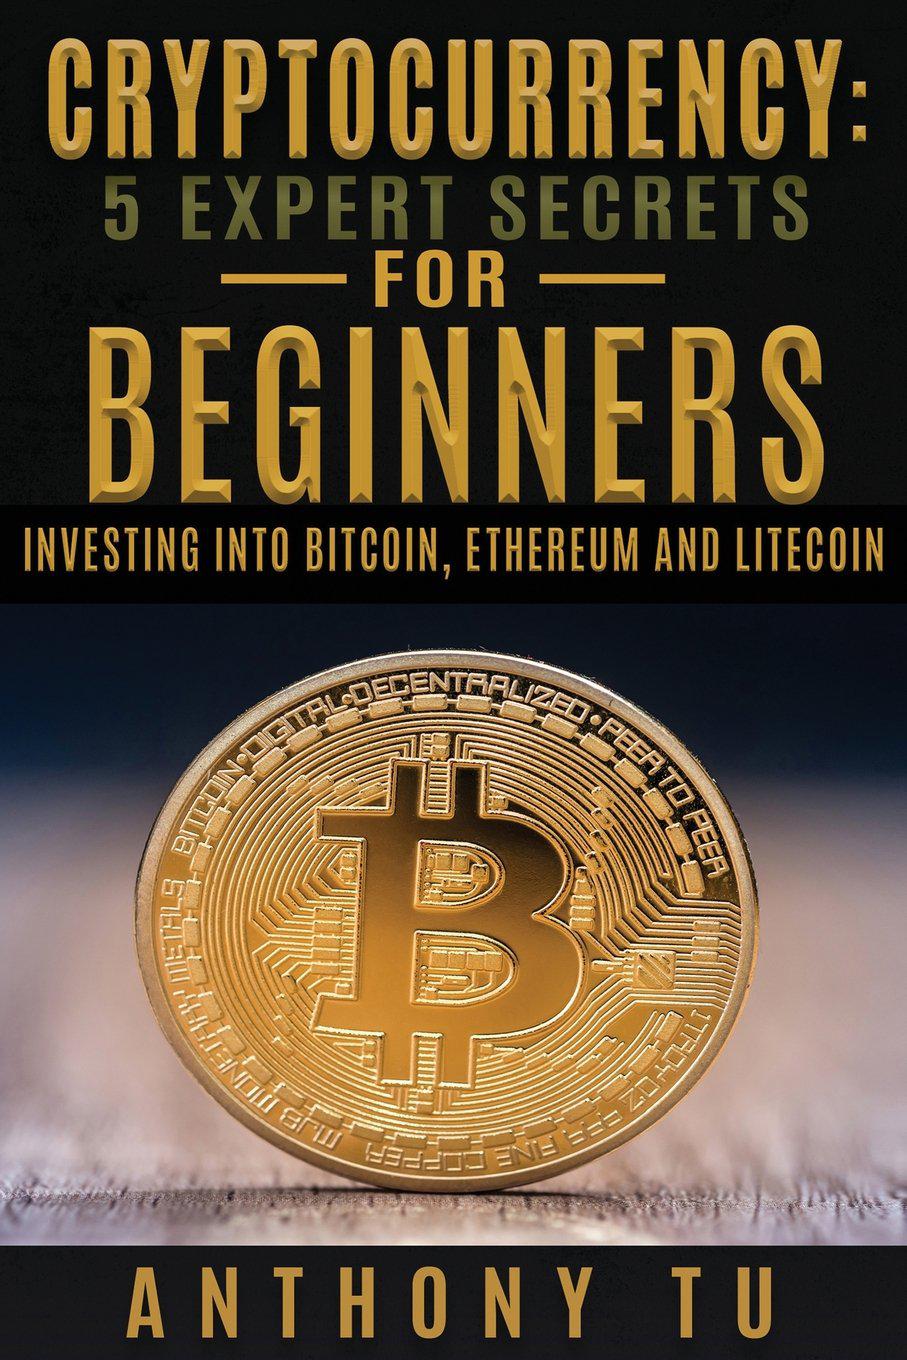 The eBooks which will make you an expert on cryptocurrency